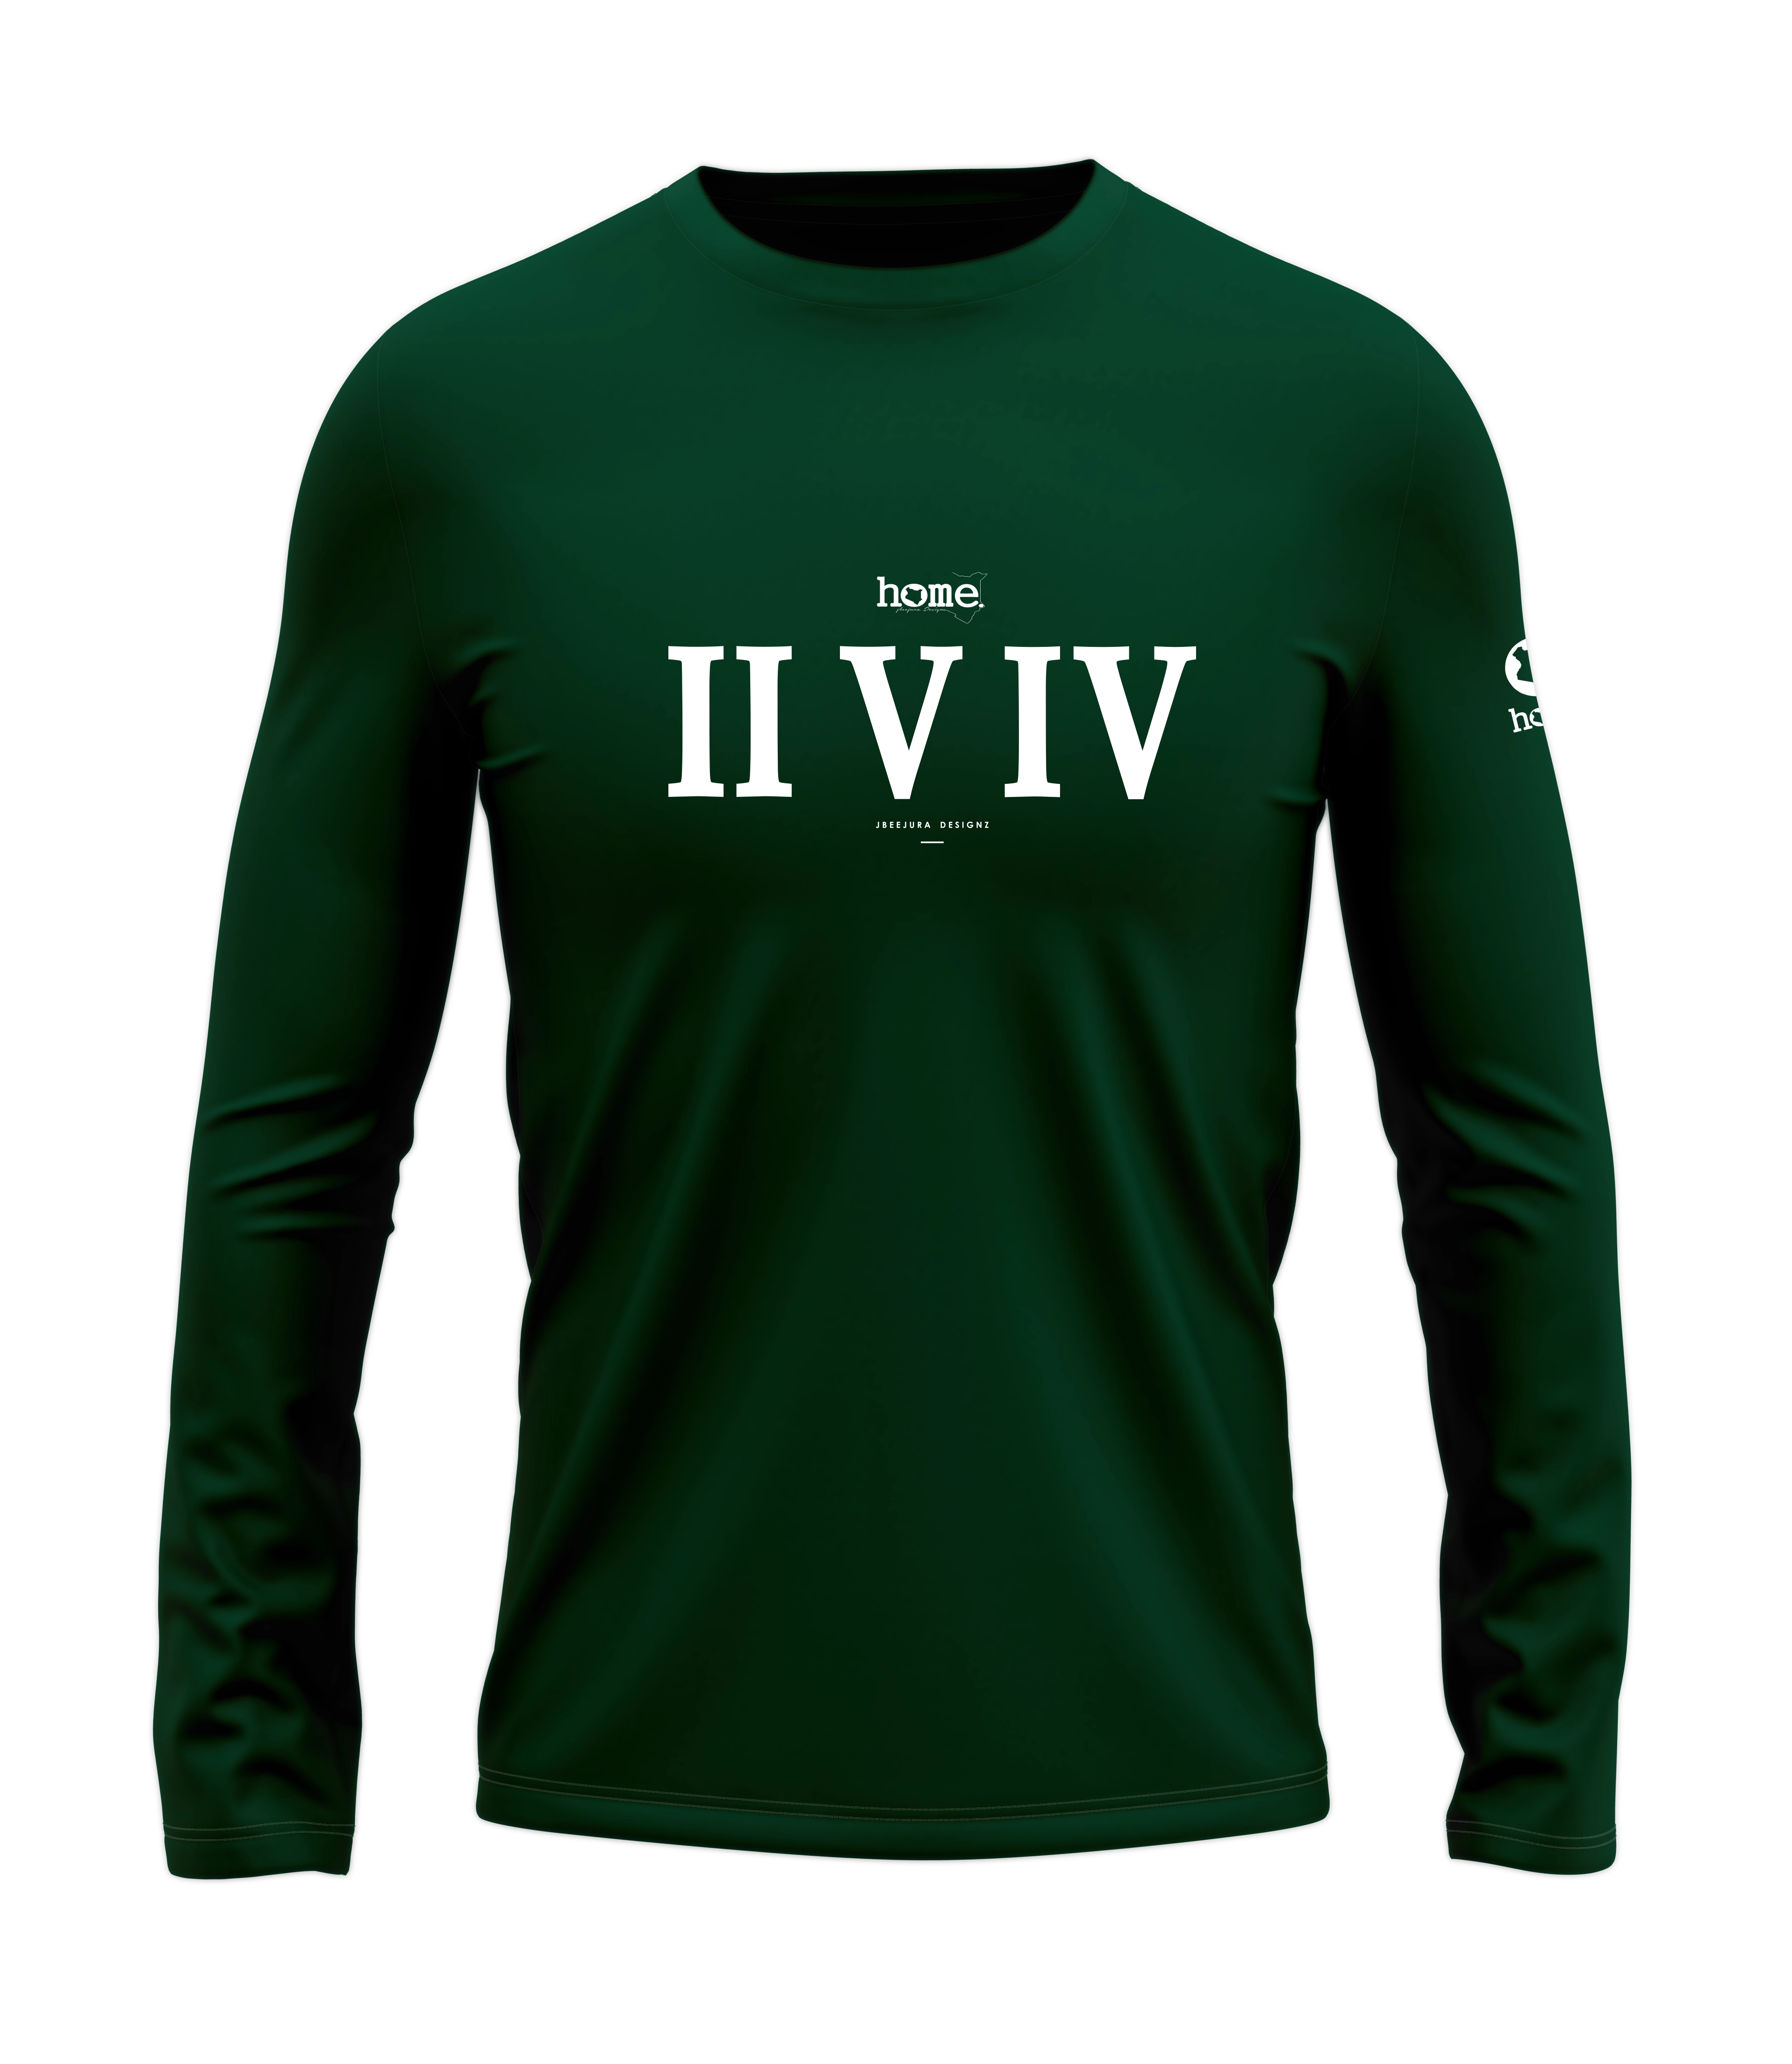 home_254 LONG-SLEEVED RICH GREEN T-SHIRT WITH A WHITE ROMAN NUMERALS PRINT – COTTON PLUS FABRIC